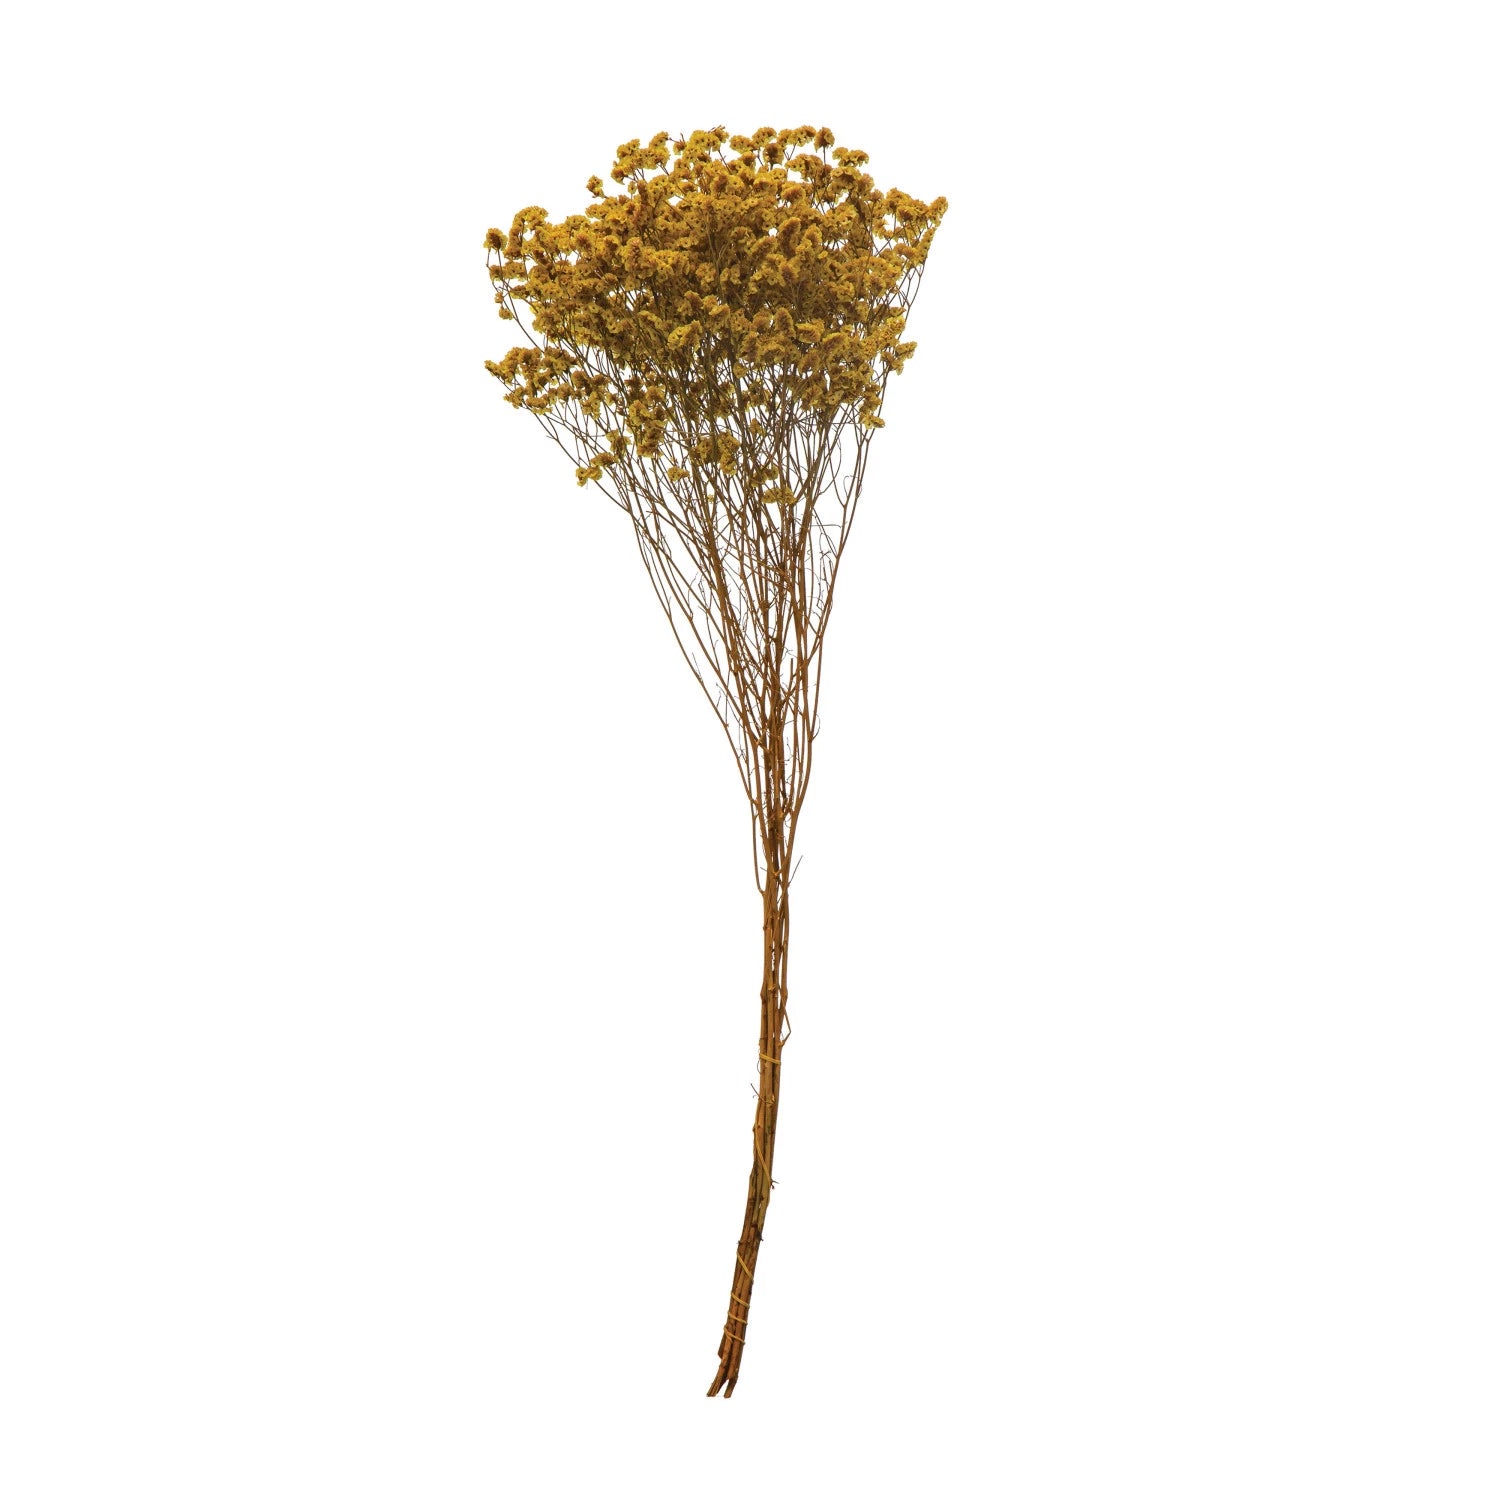 Dried natural pearl grass bunch